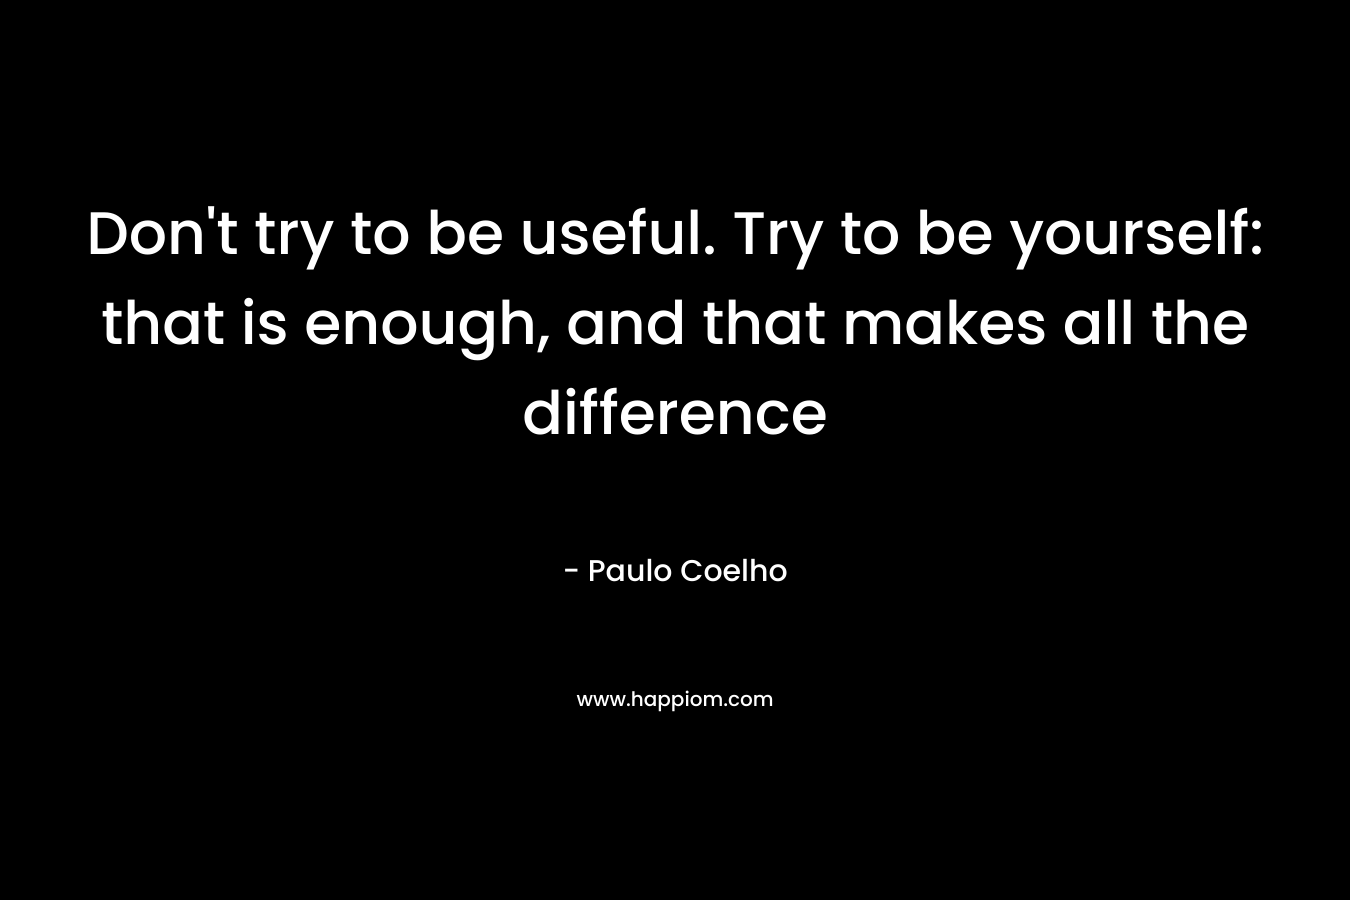 Don't try to be useful. Try to be yourself: that is enough, and that makes all the difference